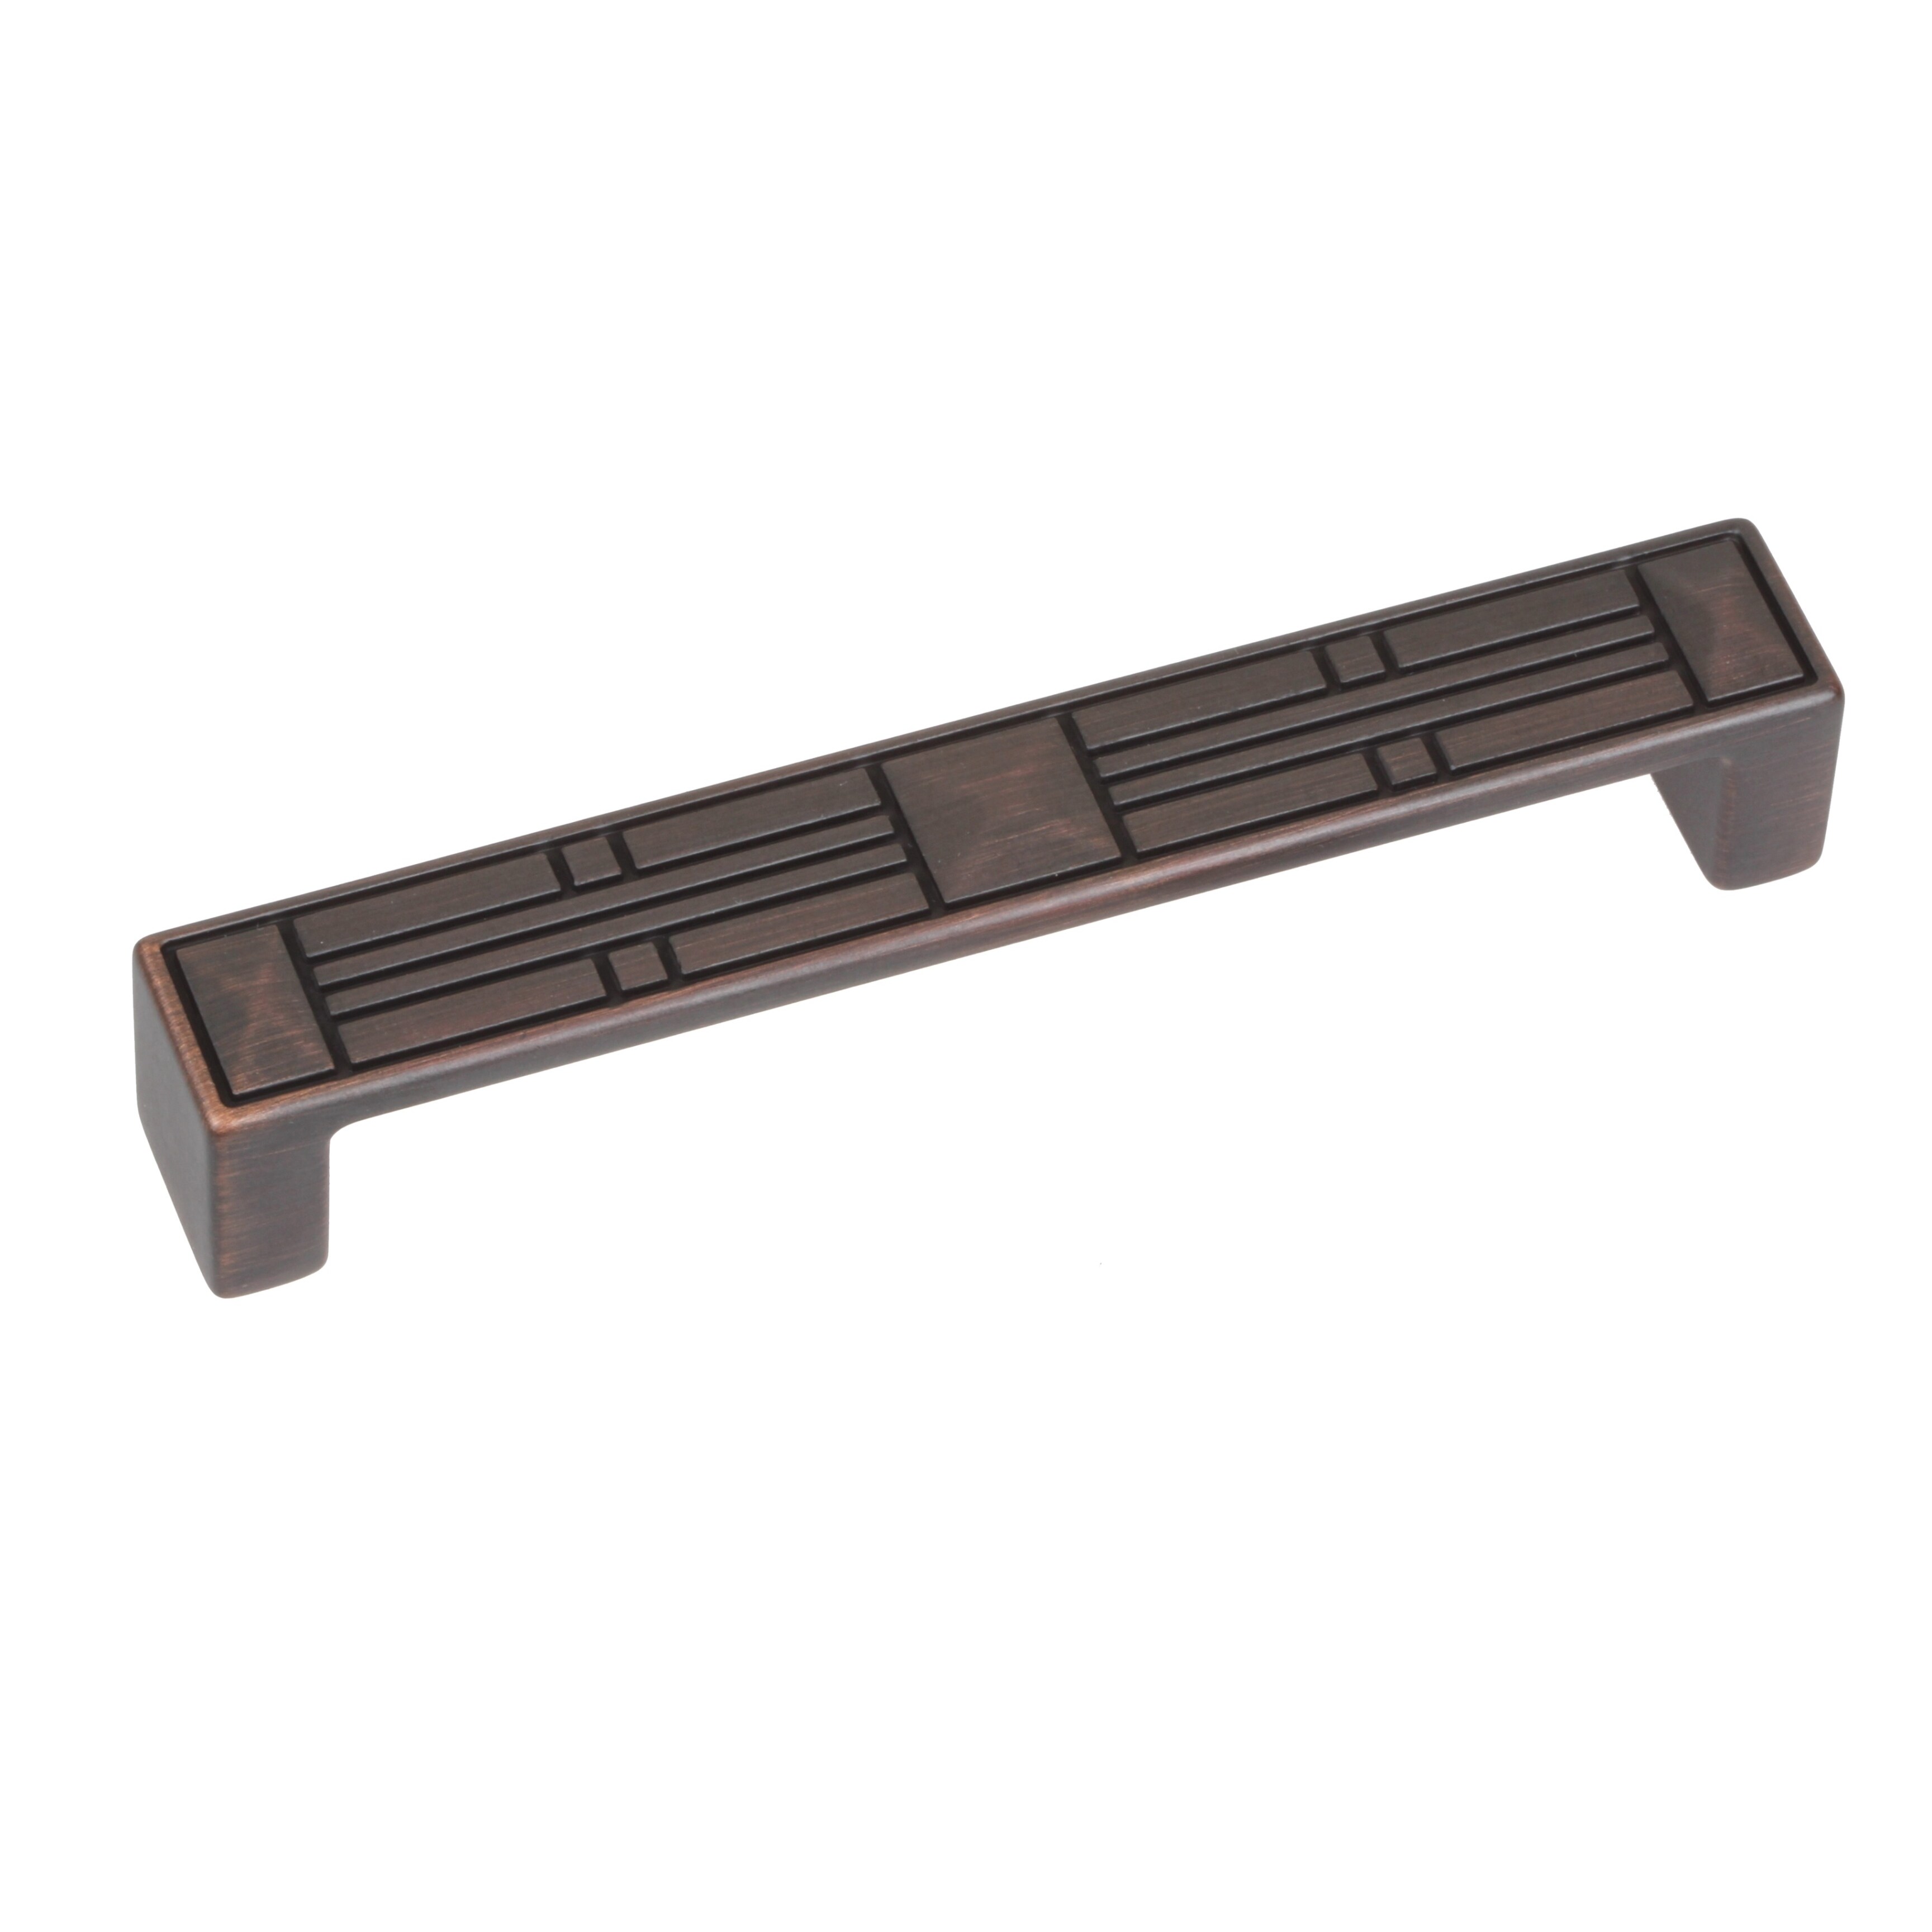 GlideRite 5 in. Center Modern Rectangular Flat Pyramid Pull Cabinet Hardware Handles, Oil Rubbed Bronze, Pack of 10 - image 2 of 4